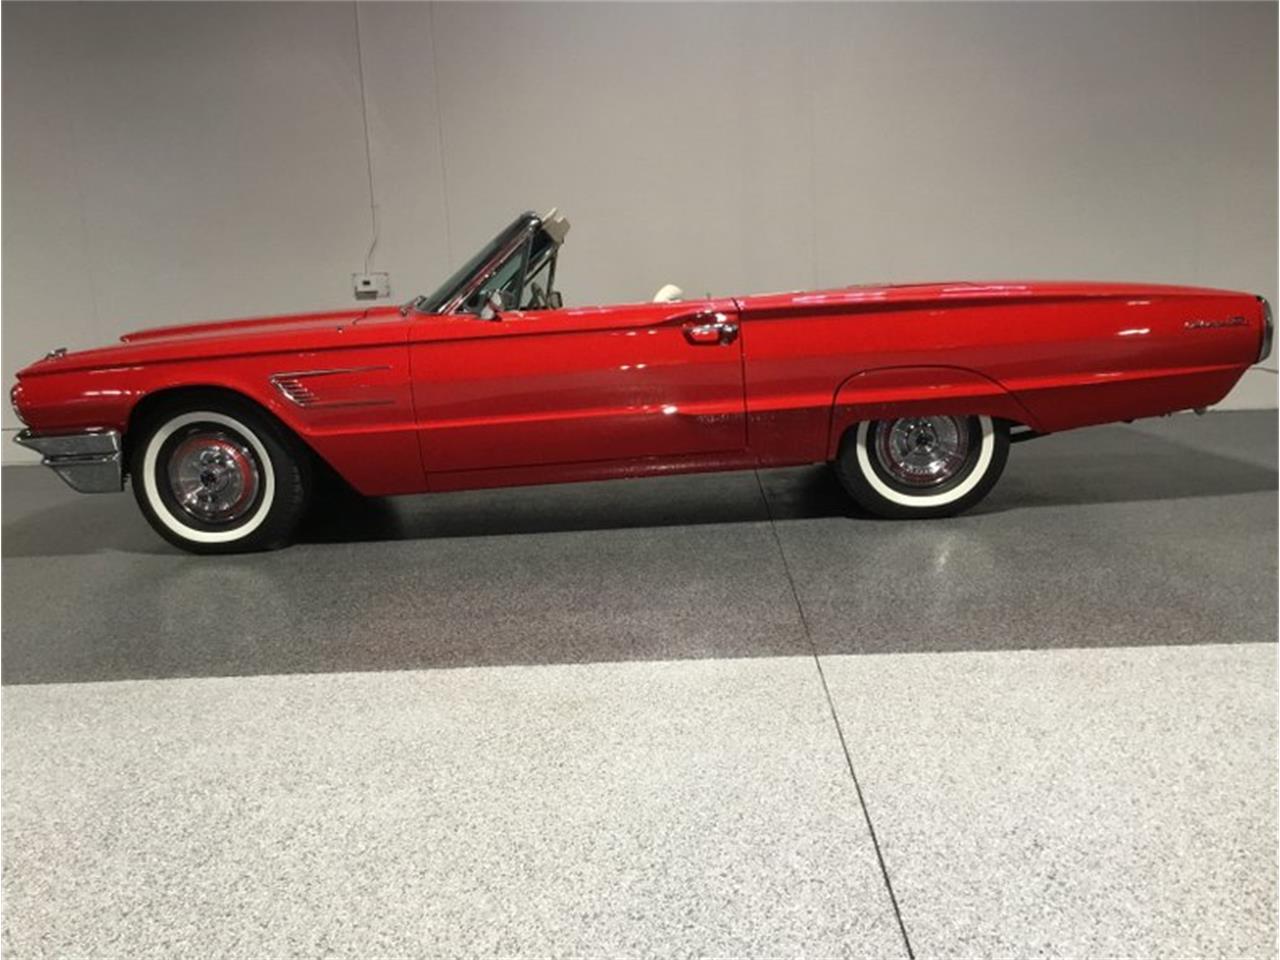 For Sale at Auction: 1965 Ford Thunderbird in Punta Gorda, Florida for sale in Punta Gorda, FL